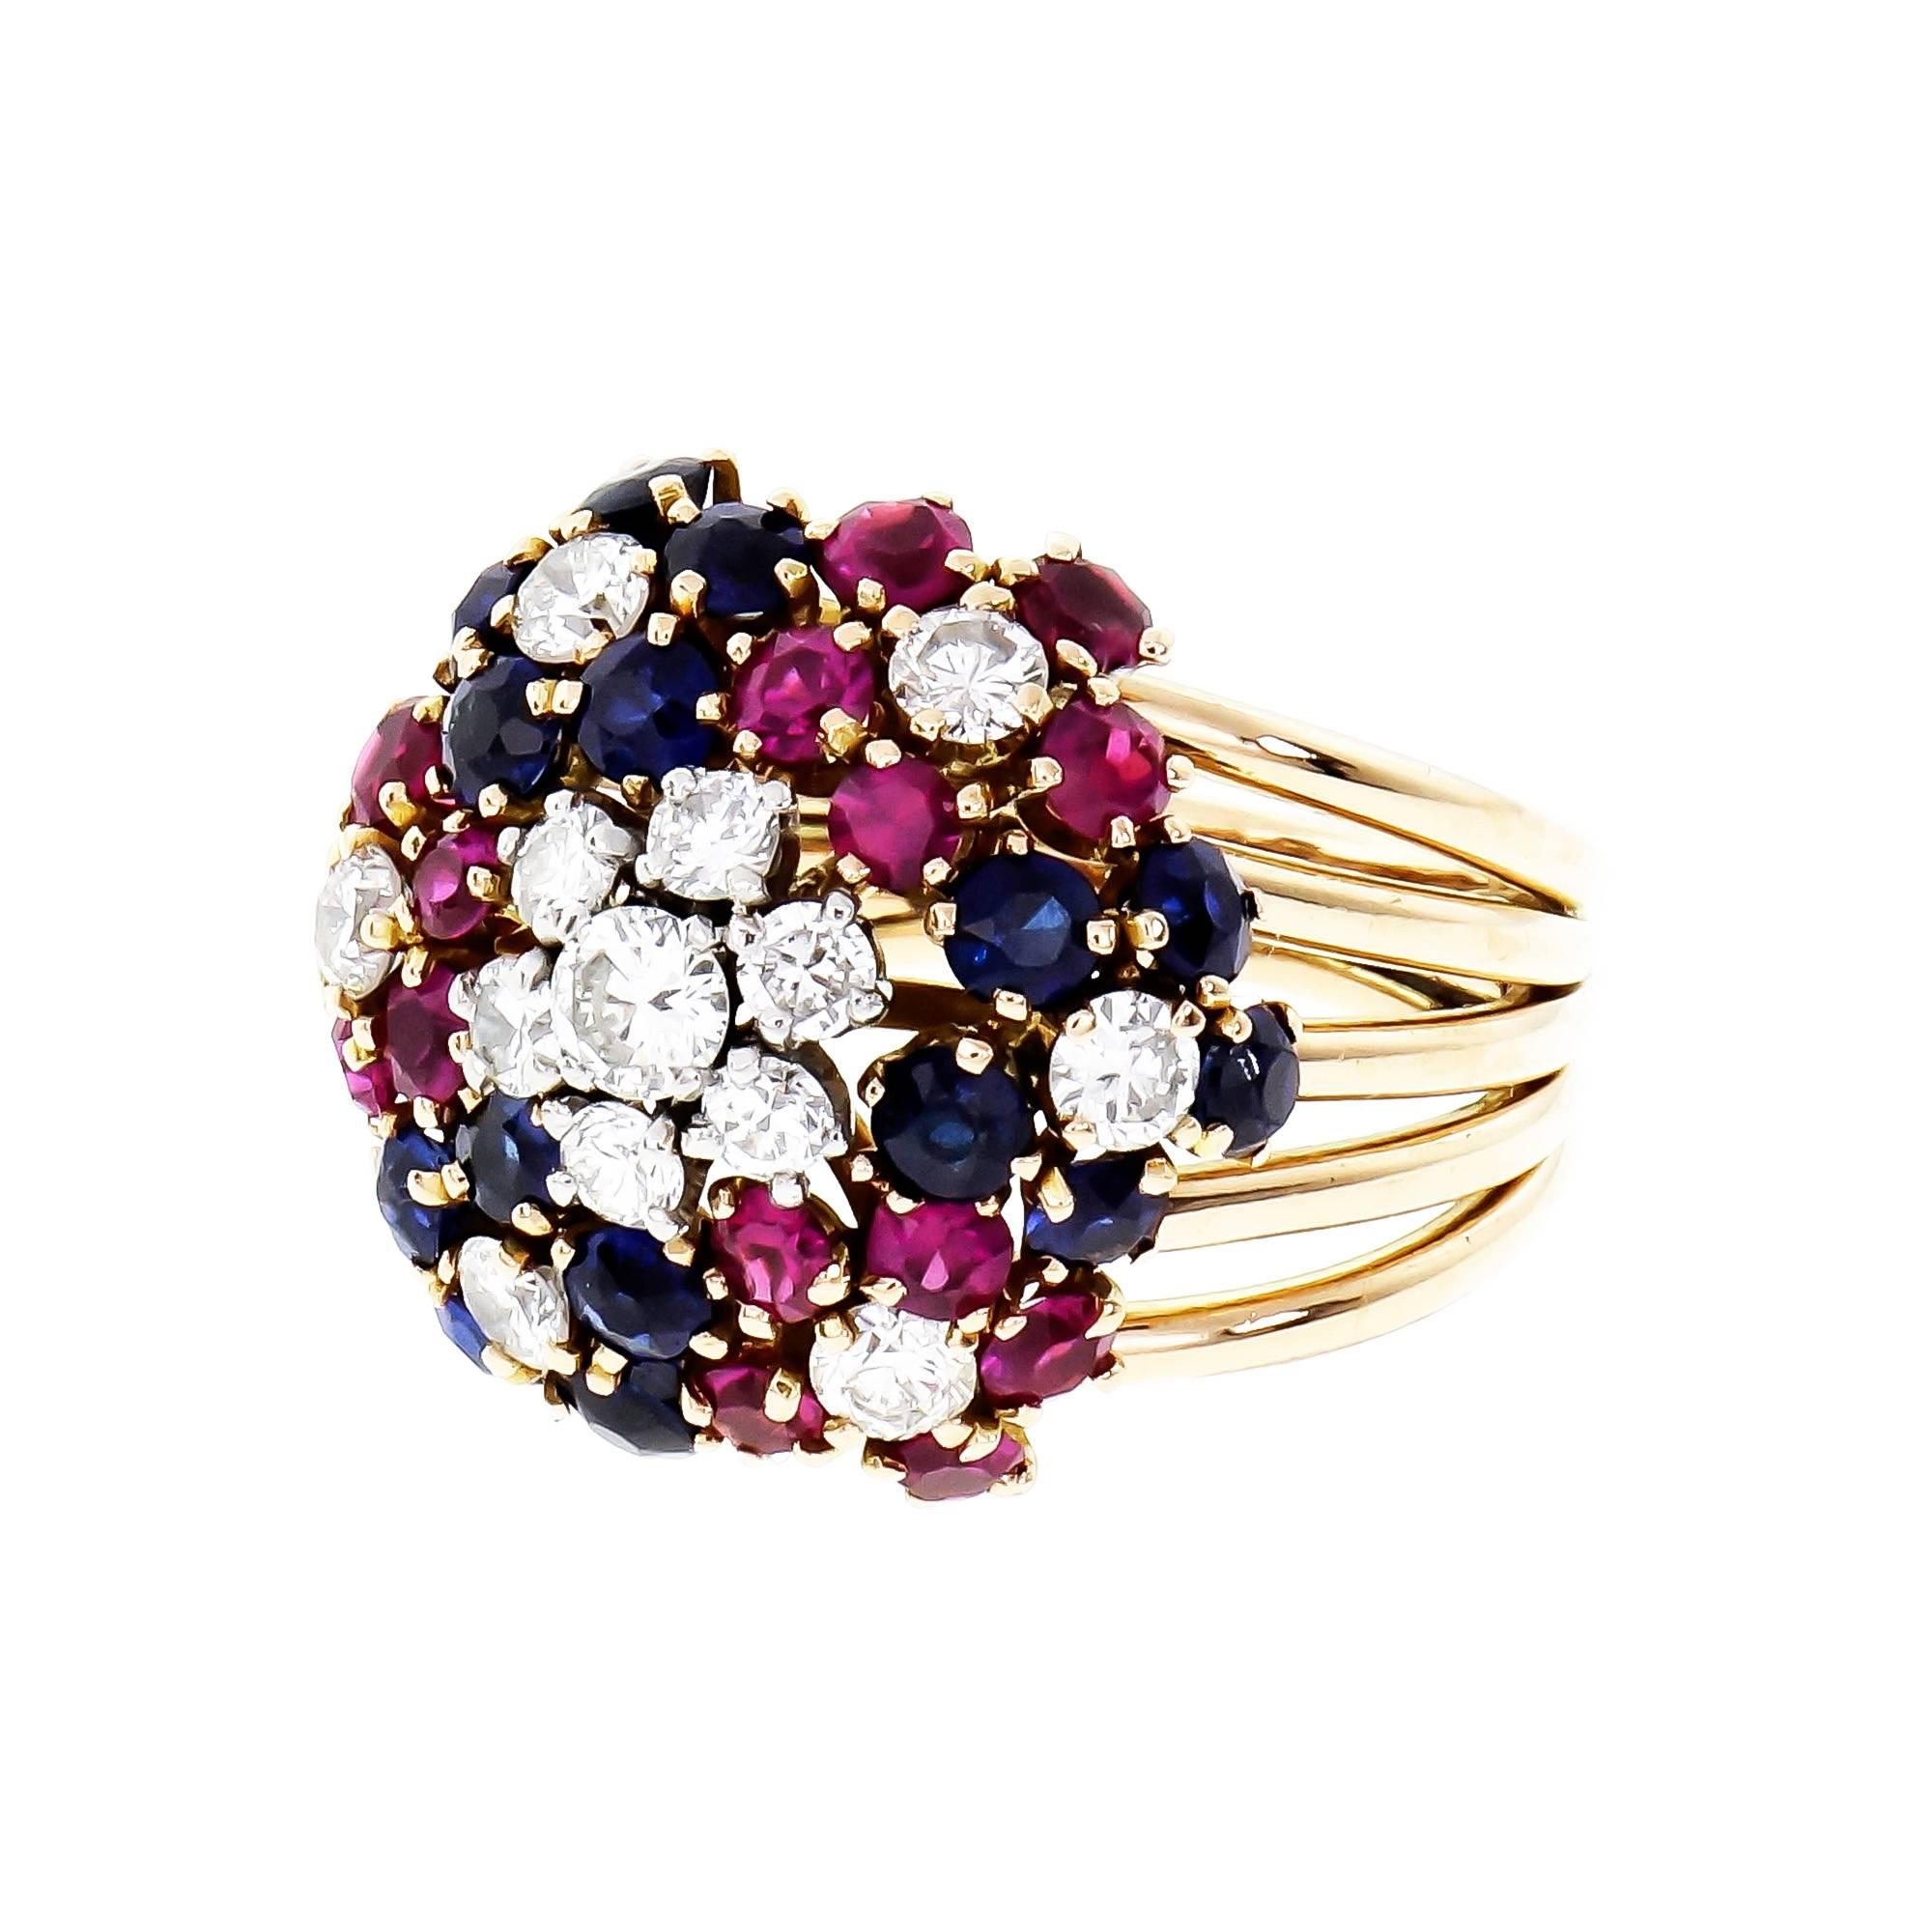 1950's Handmade 18k rose gold with full cut Diamonds and natural Rubies and Sapphires cocktail ring. 

13 round full cut Diamonds, approx. total weight .60cts, F, VS
15 round red Rubies, approx. total weight 1.25cts, SI, 2.5mm
15 round fine blue